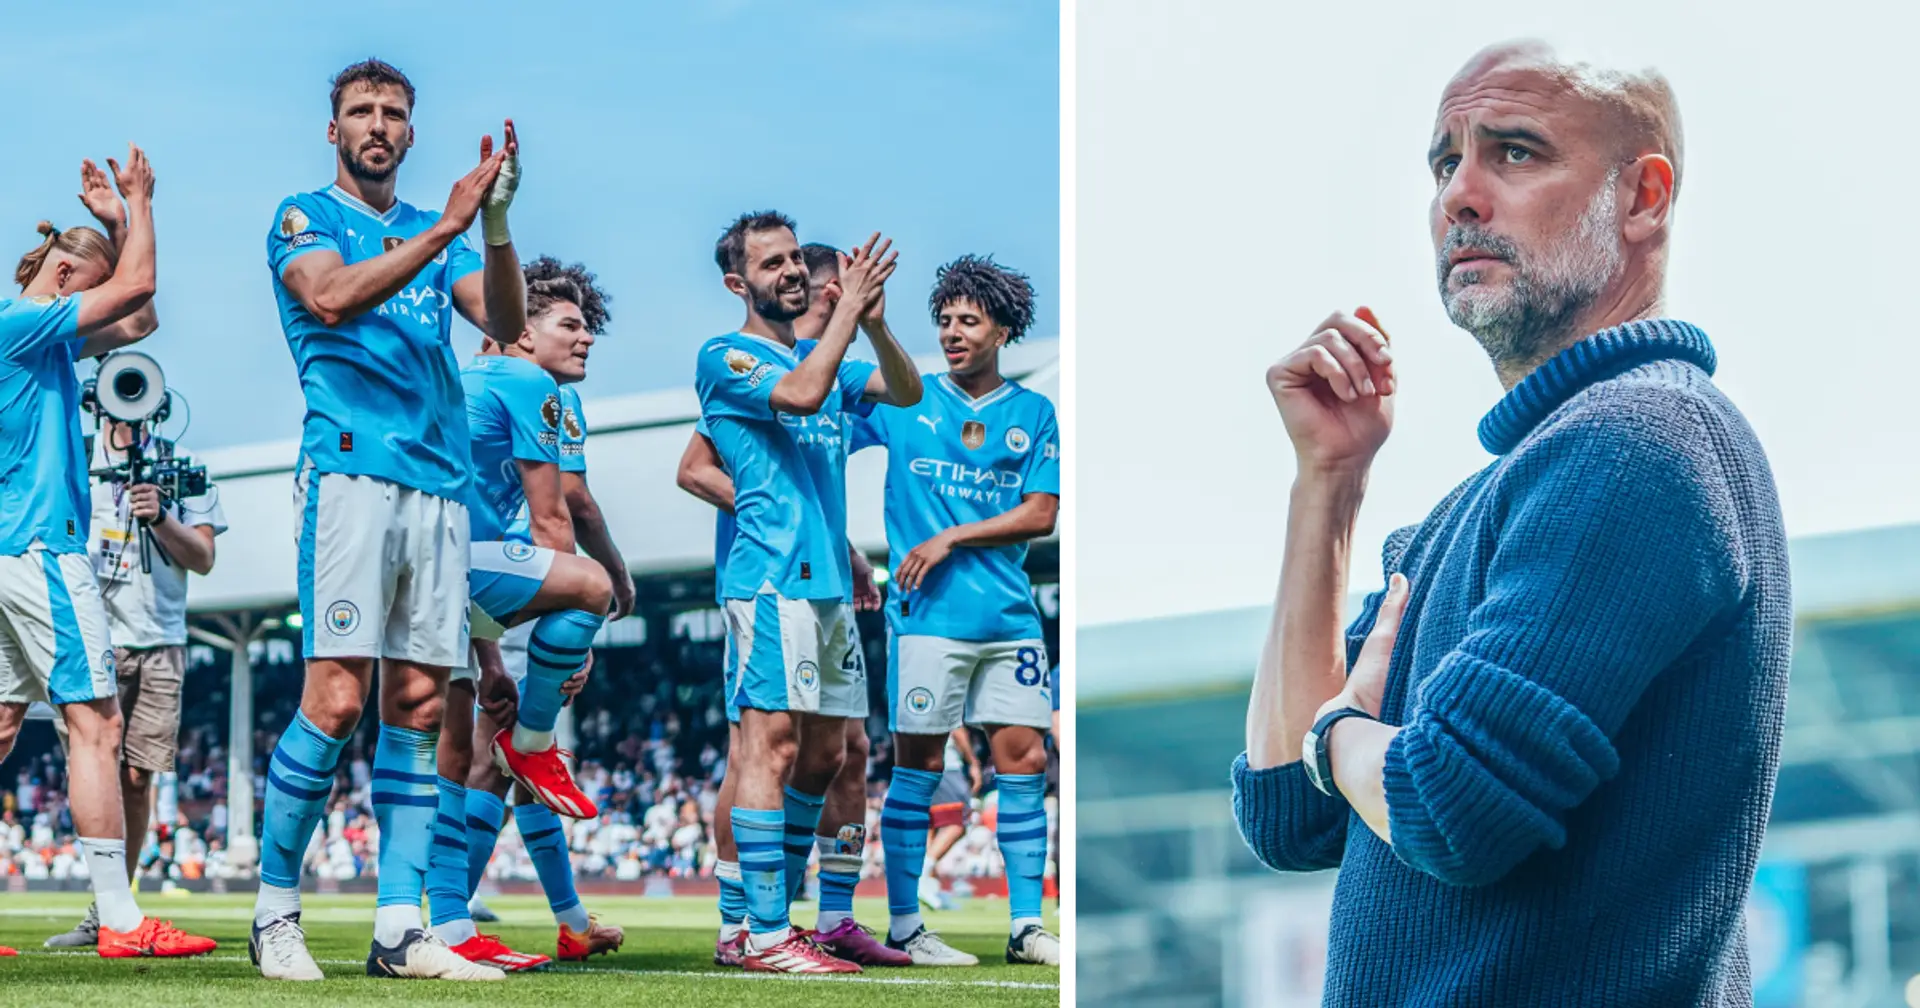 'Of course, we can drop points and lose games': Pep Guardiola is surprised by fans' overconfidence in his team 